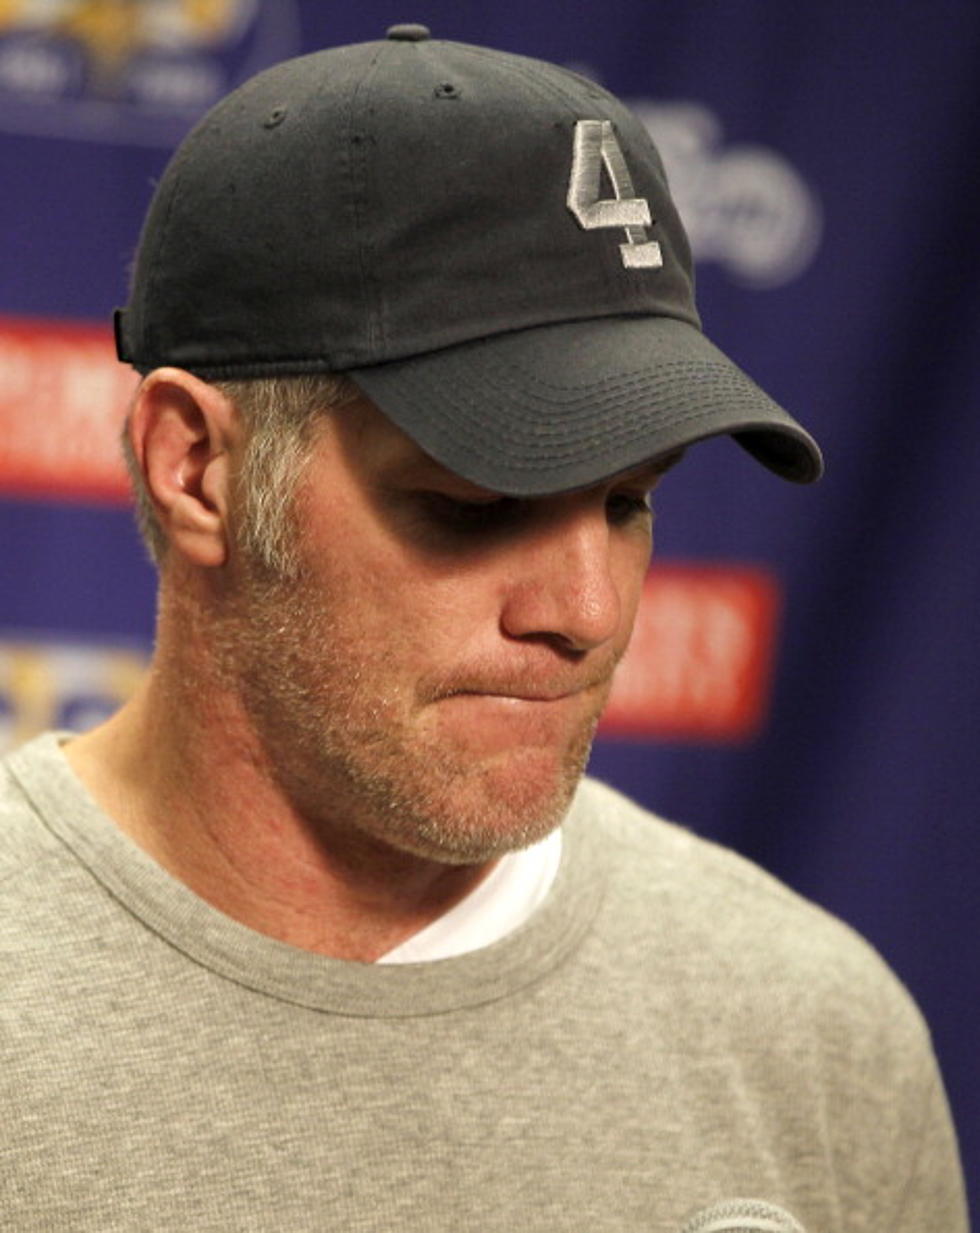 Brett Favre’s agent: Talk of a possible comeback this season is just speculation.